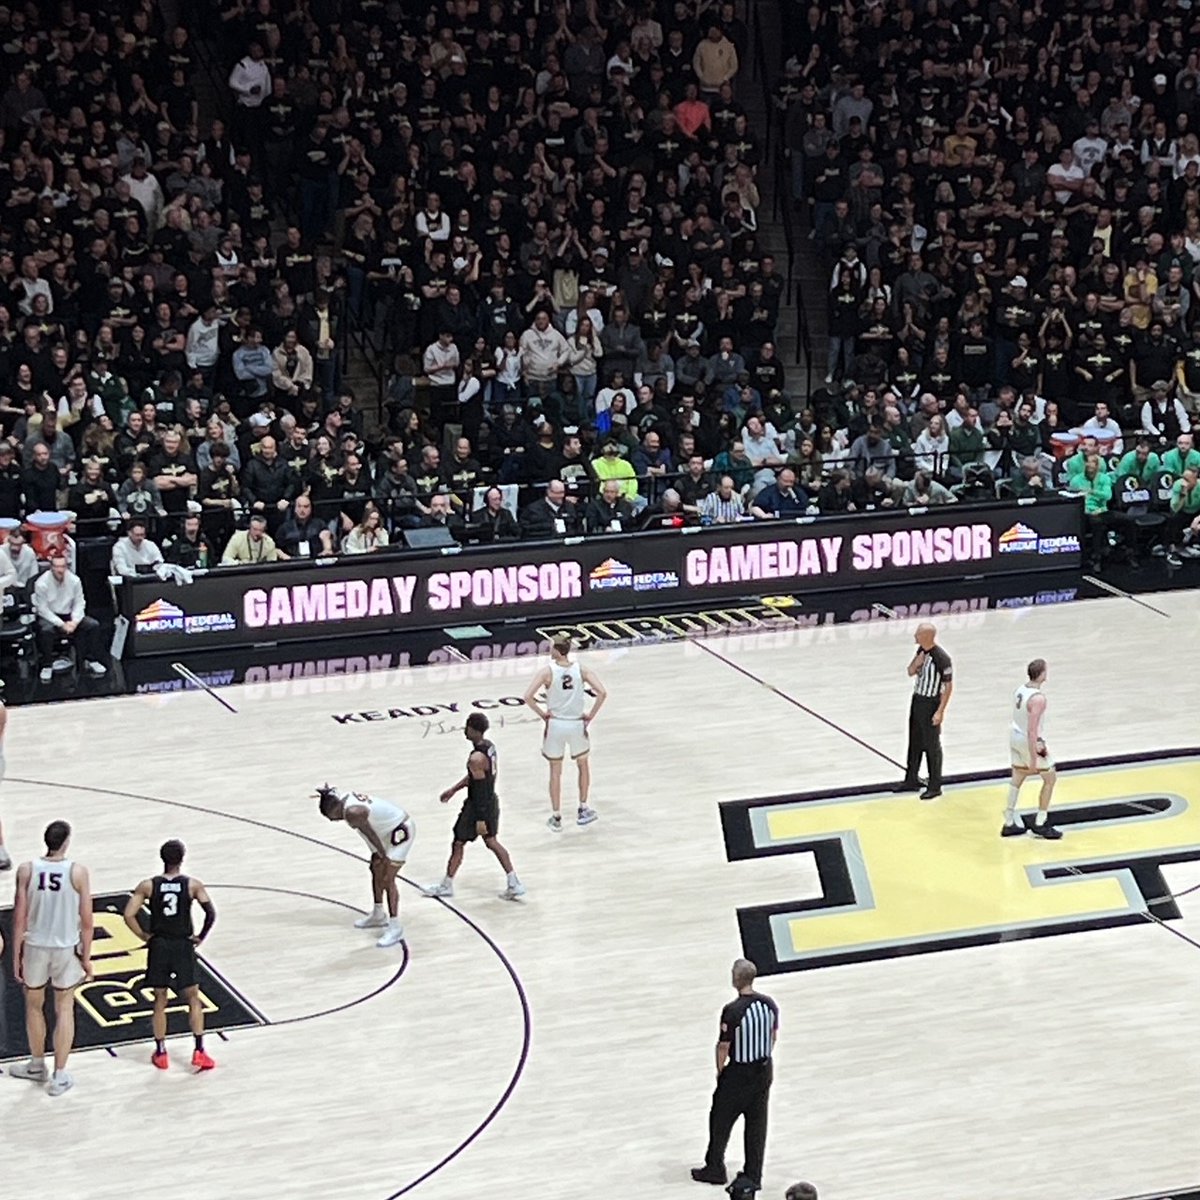 We had so much fun as the gameday sponsor at Saturday's @boilerball game against Michigan State! 🏀 What an amazing game! During the game, we hosted a half-court challenge where a selected student had the opportunity to make a shot from half-court to win $2,500. Though he didn't